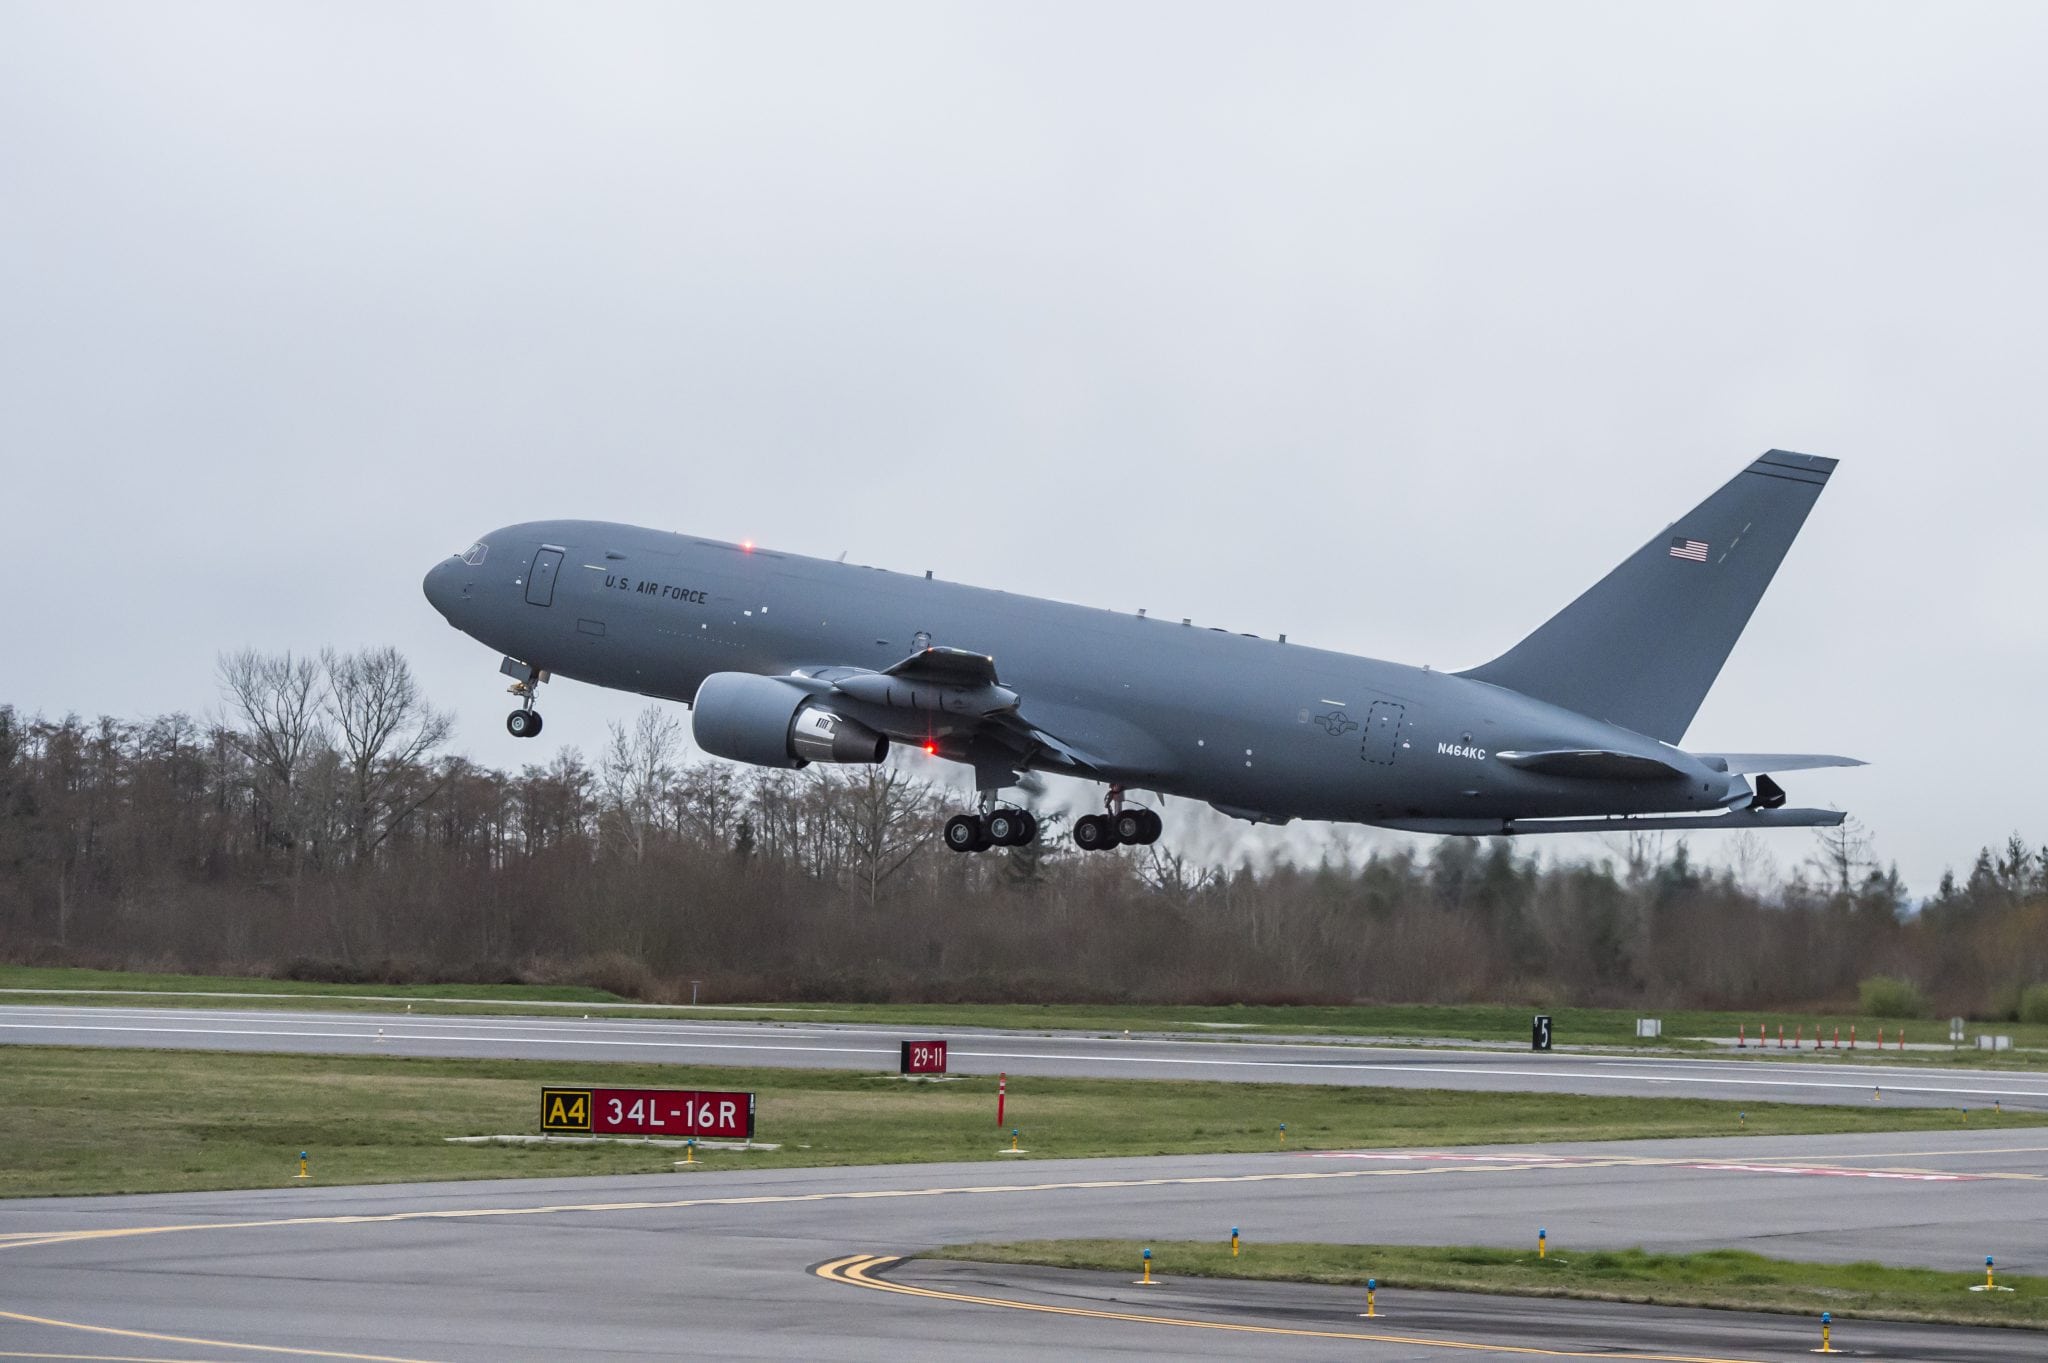 Boeing’s second KC-46 tanker (EMD-4) takes off from Paine Field in Everett on its first flight